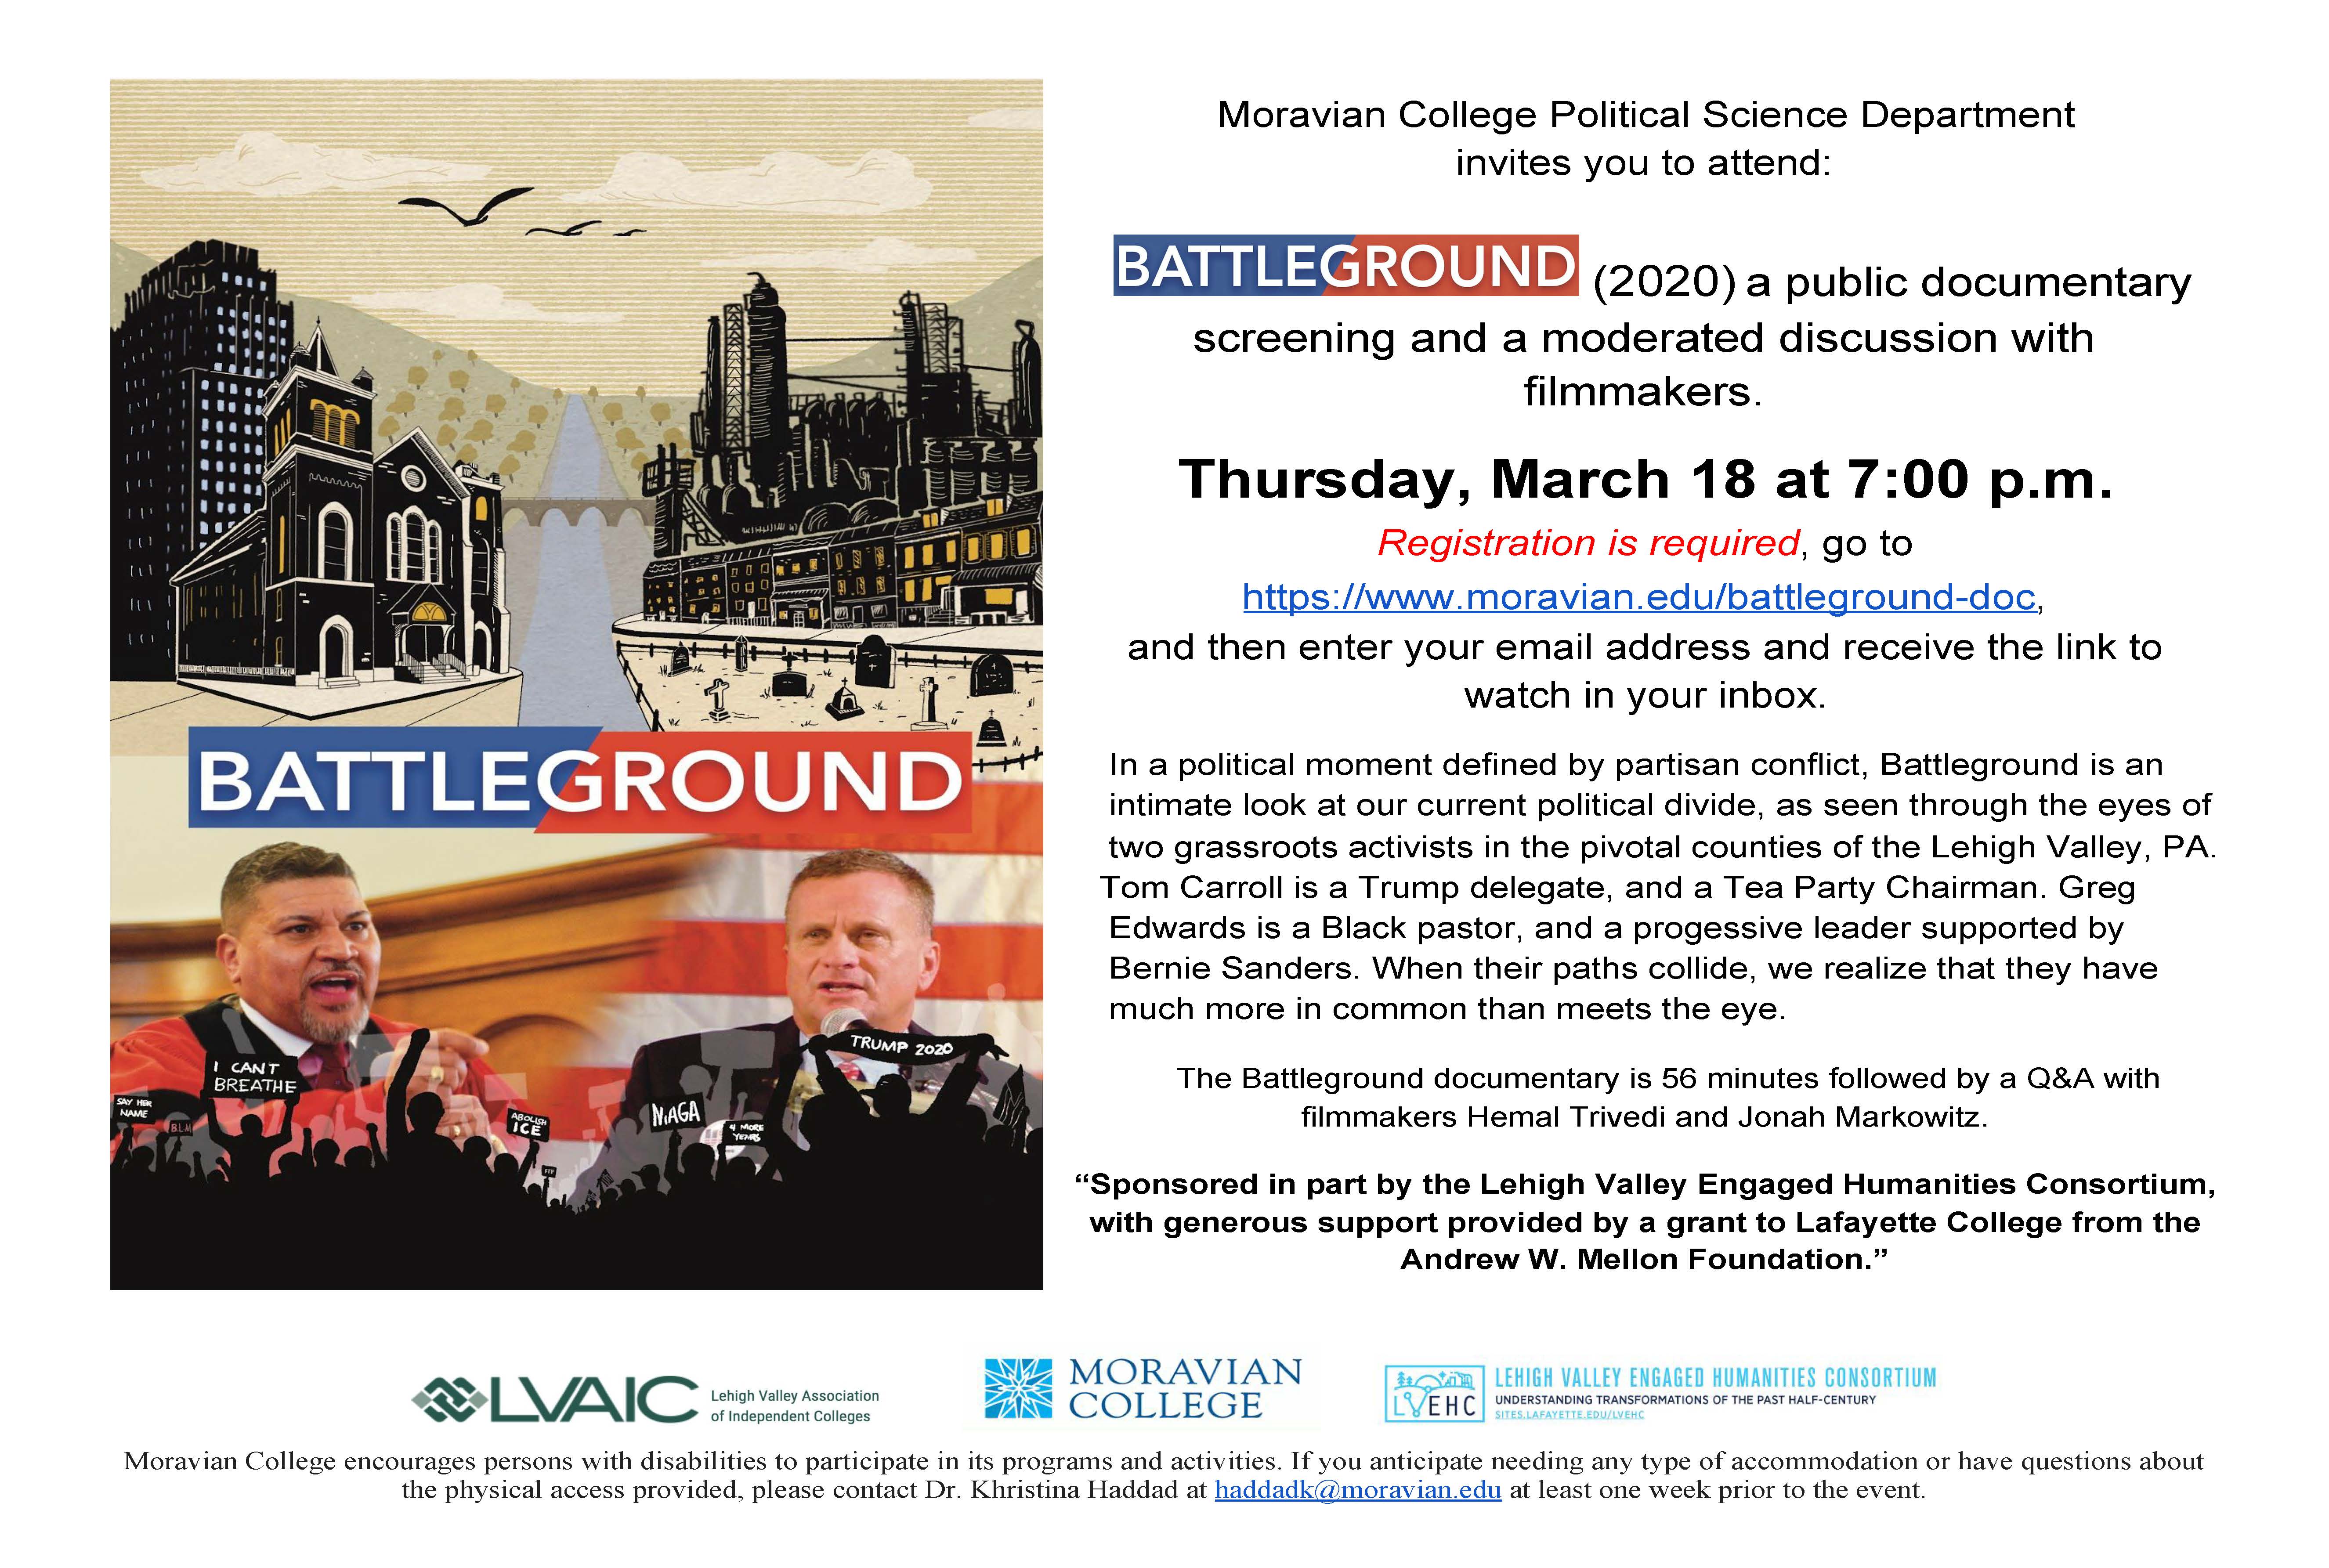 "Battleground" Documentary on Two Political Campaigns in the Lehigh Valley